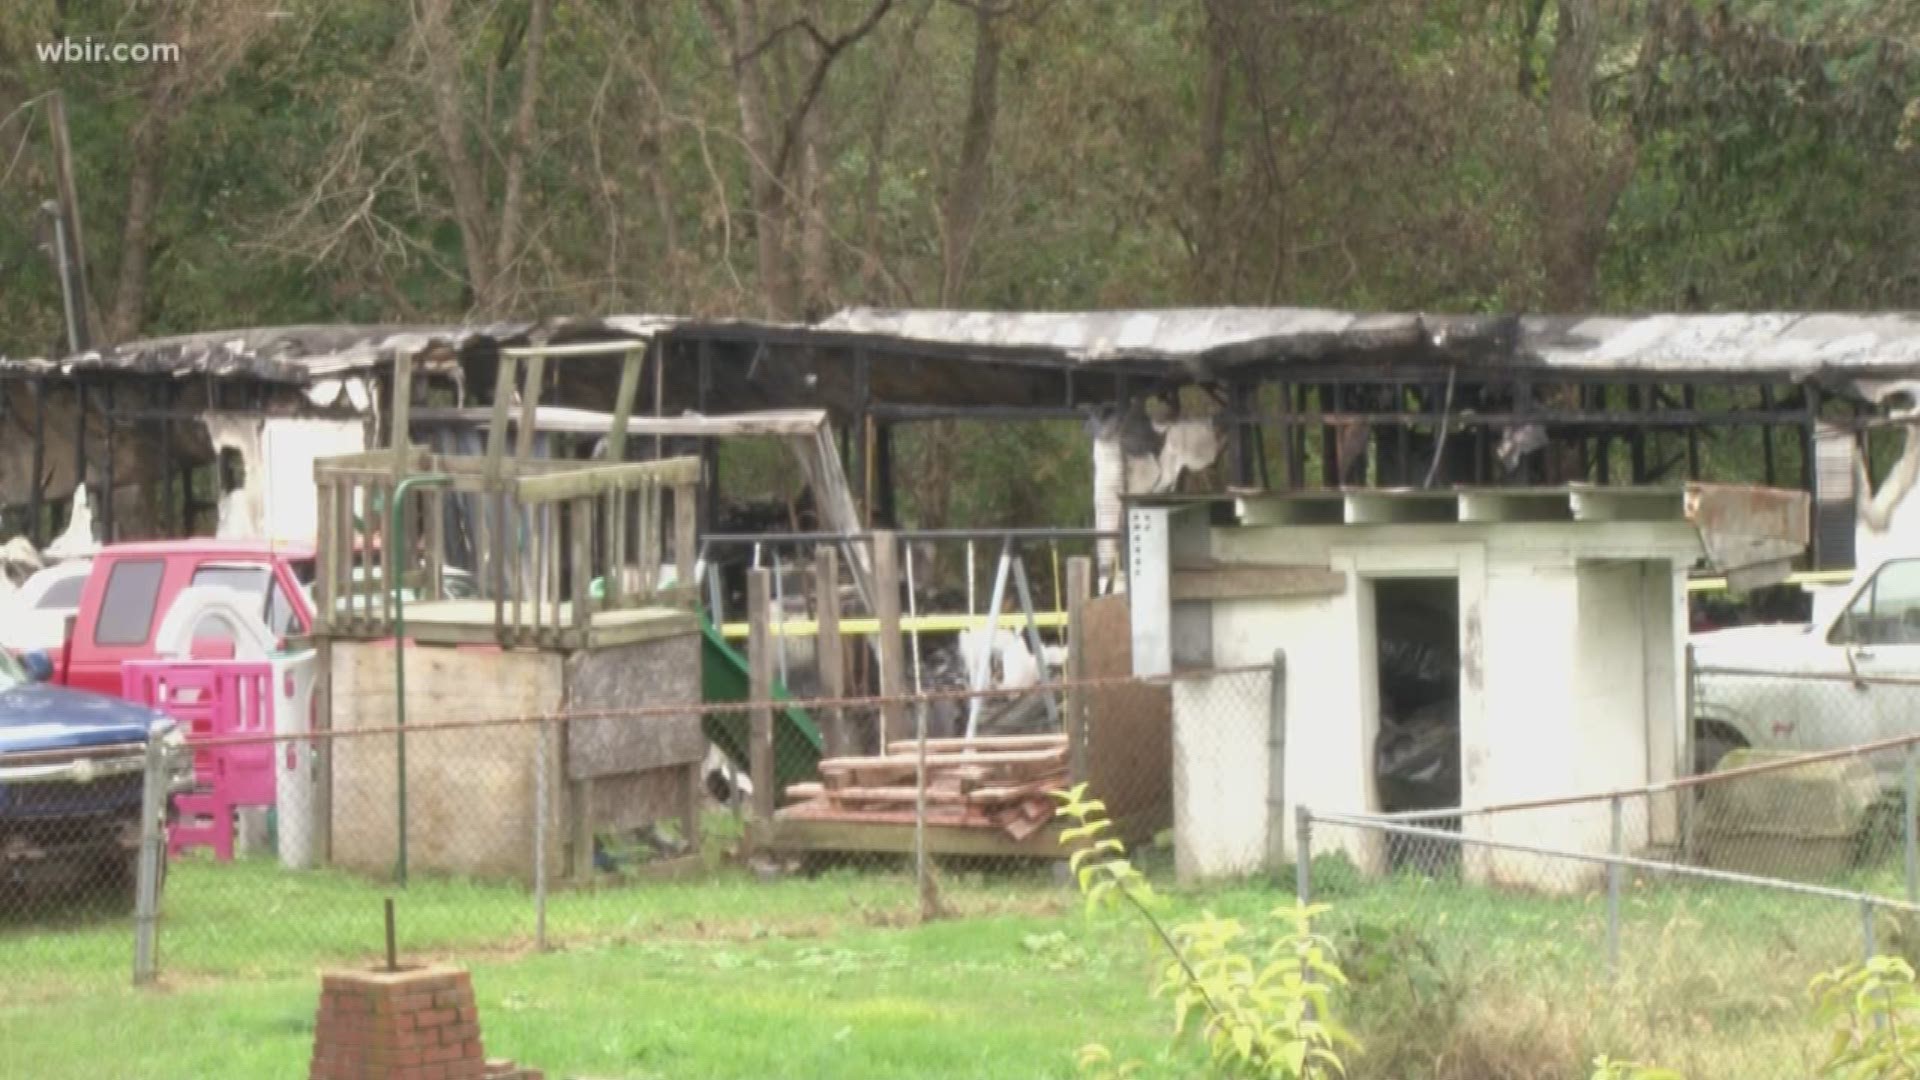 The fire burned through a single-wide trailer home just after 5 a.m. on Oct. 14.